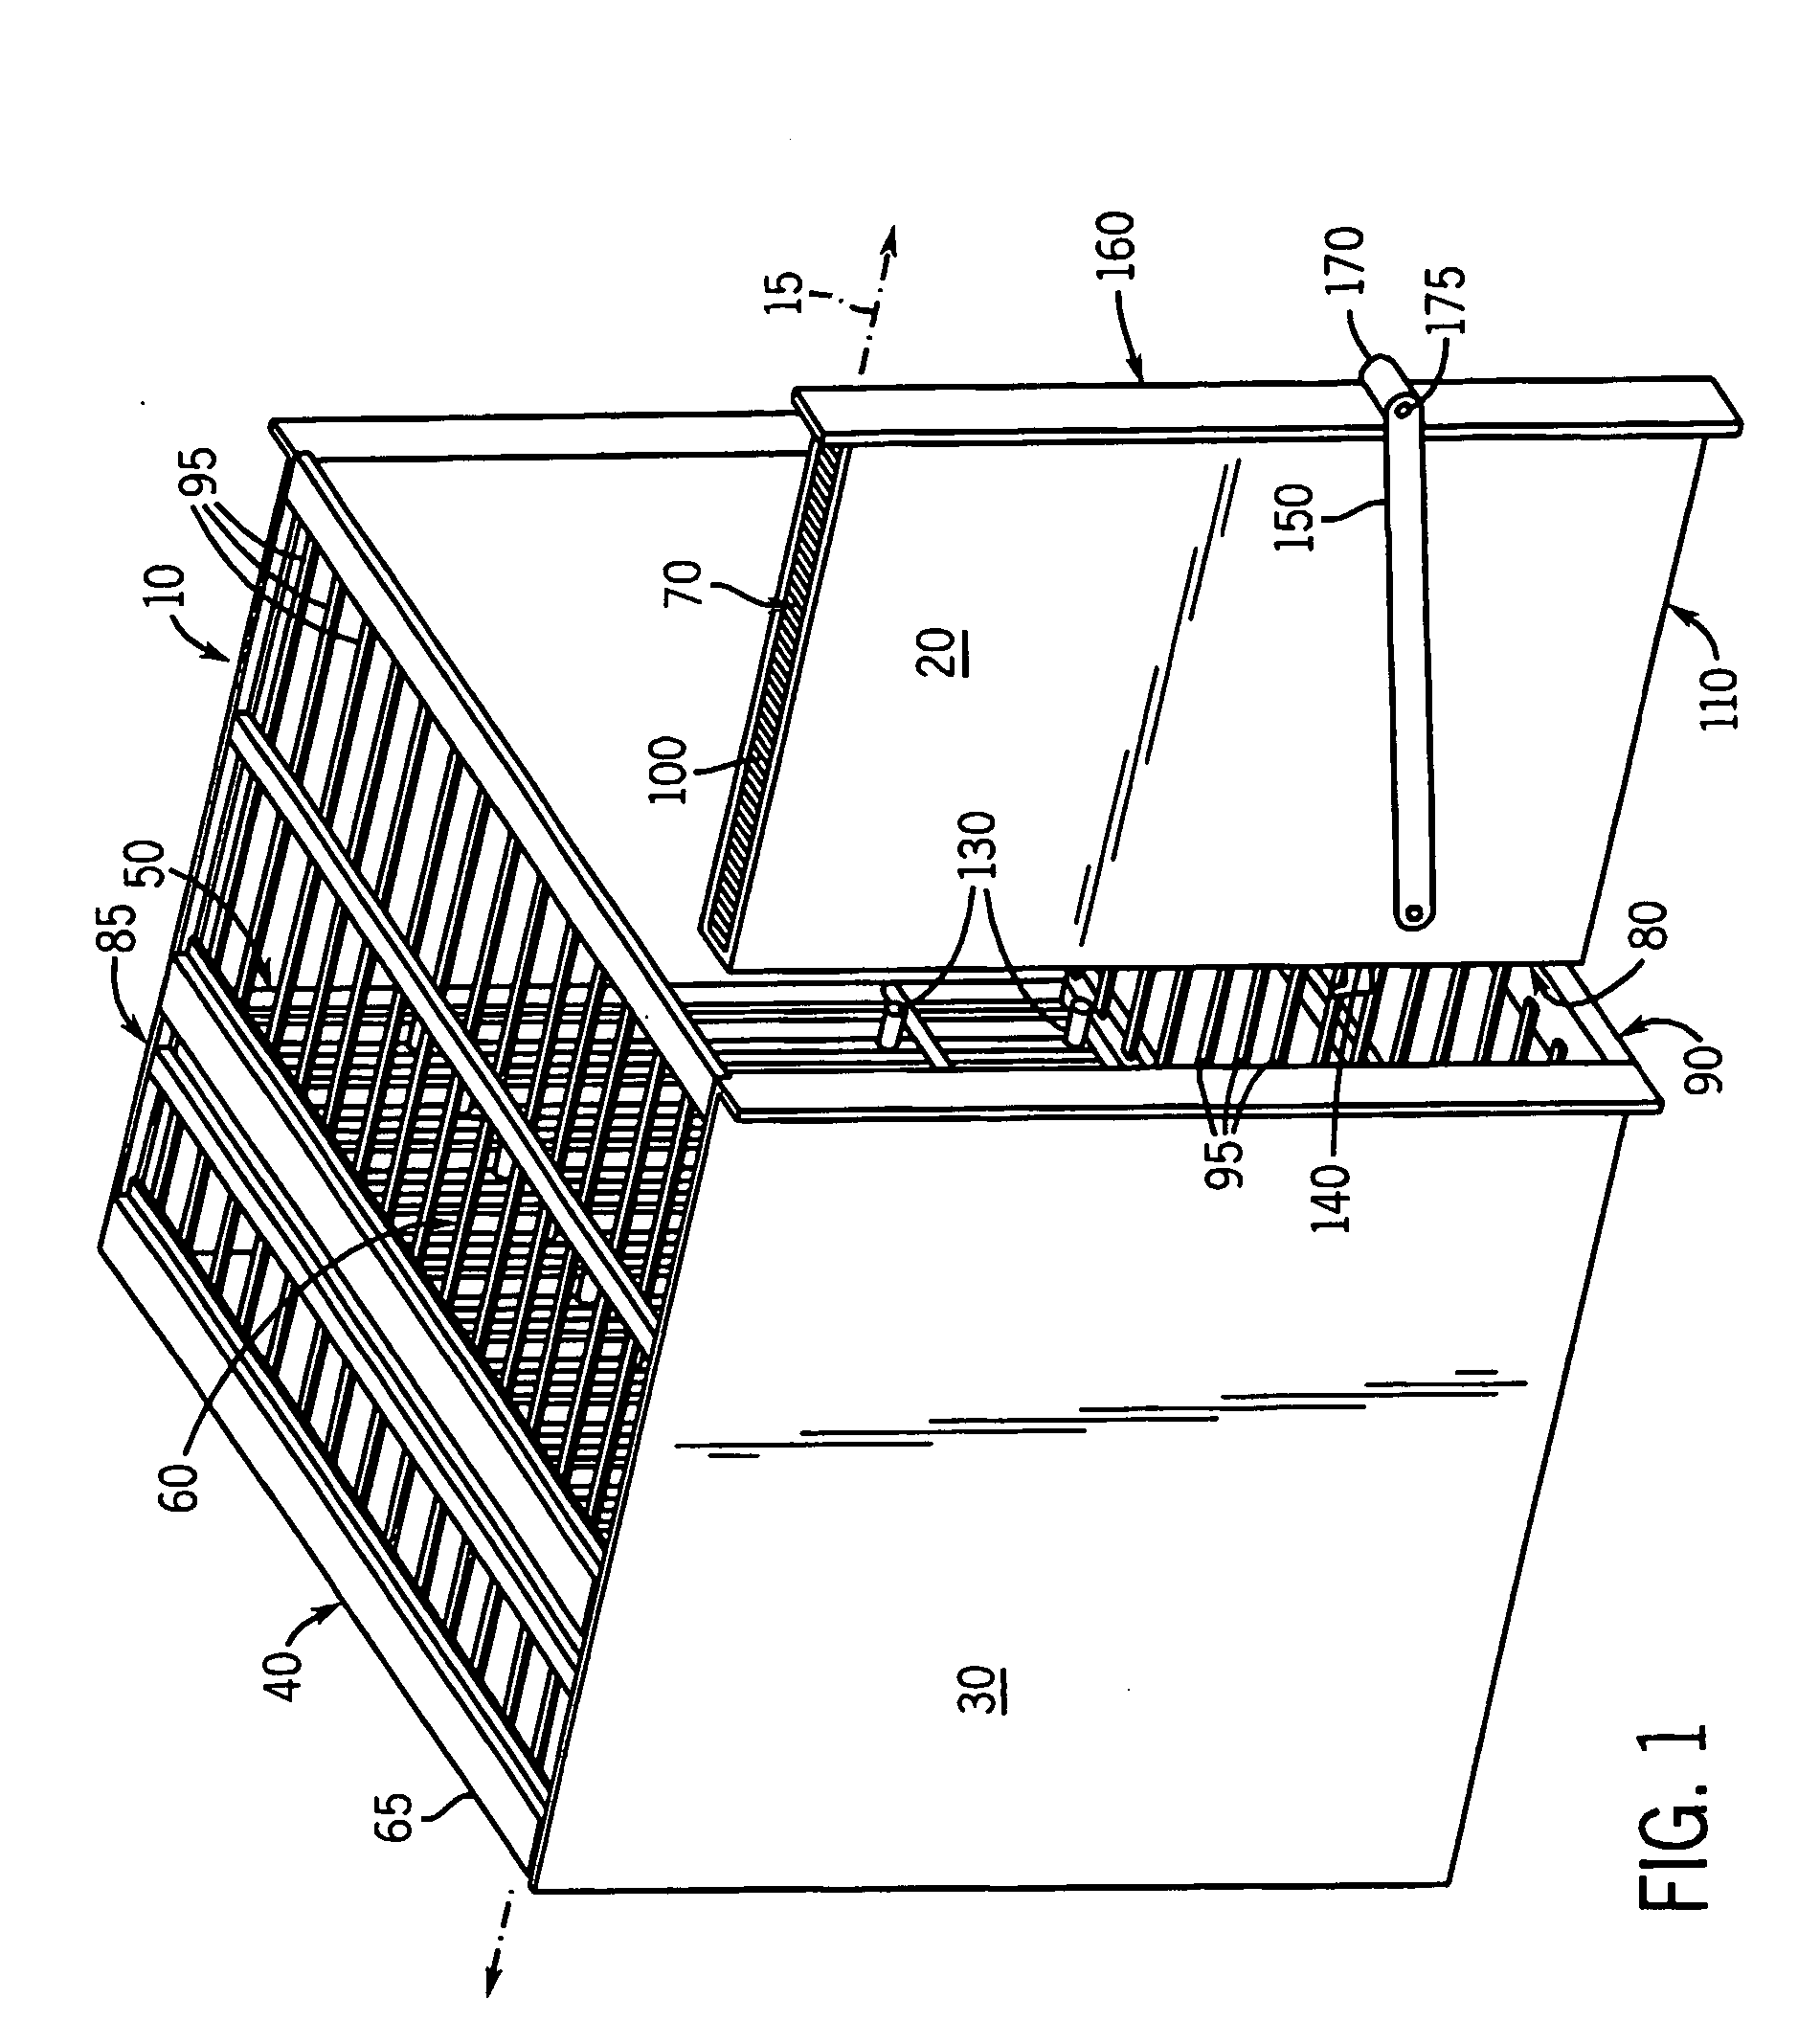 System for insertion and extraction of a printed circuit board module into and out of a subrack